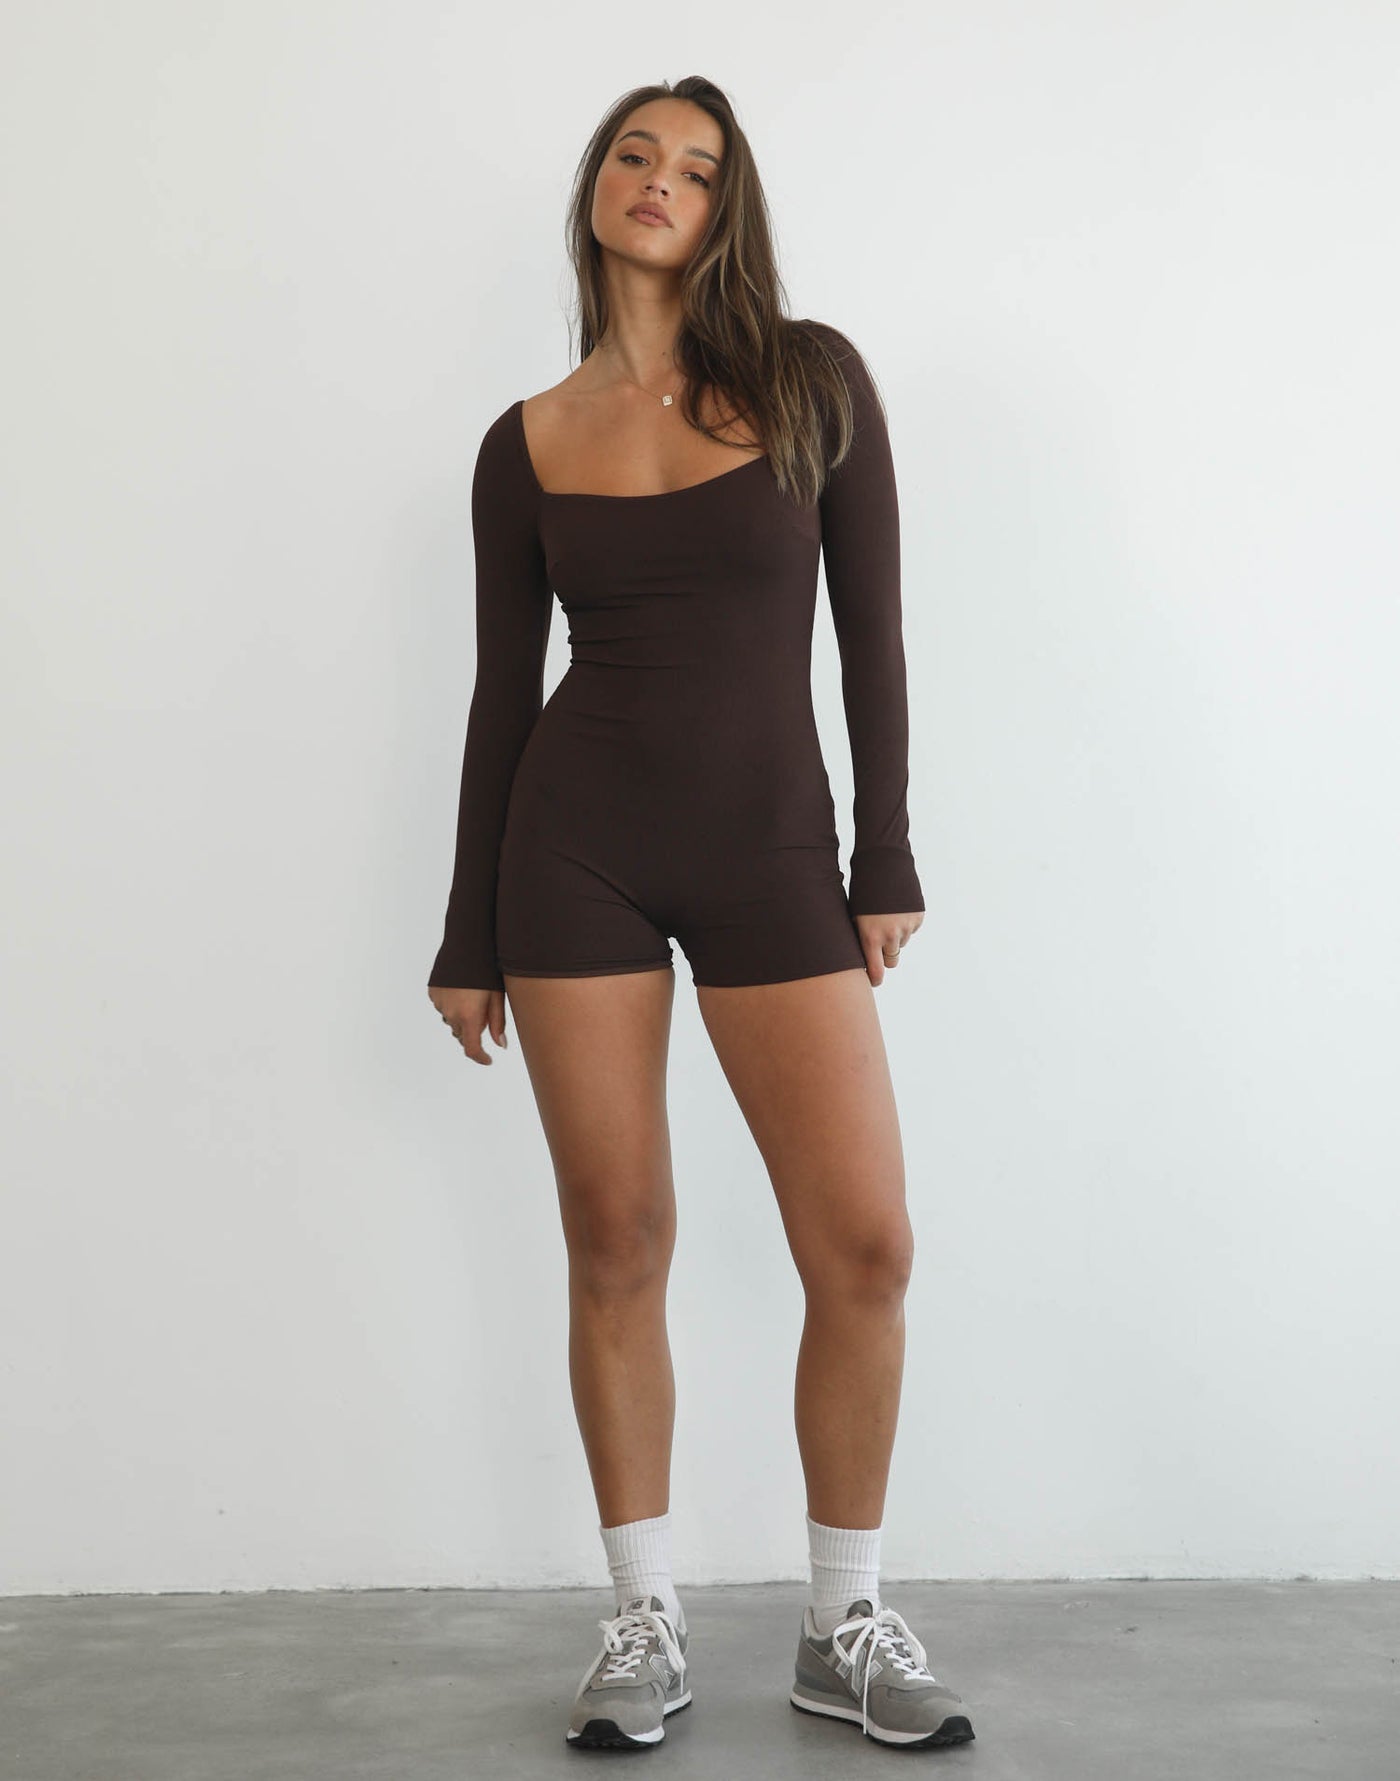 Diaz Playsuit (Cocoa) - Long Sleeve Playsuit - Women's Top - Charcoal Clothing